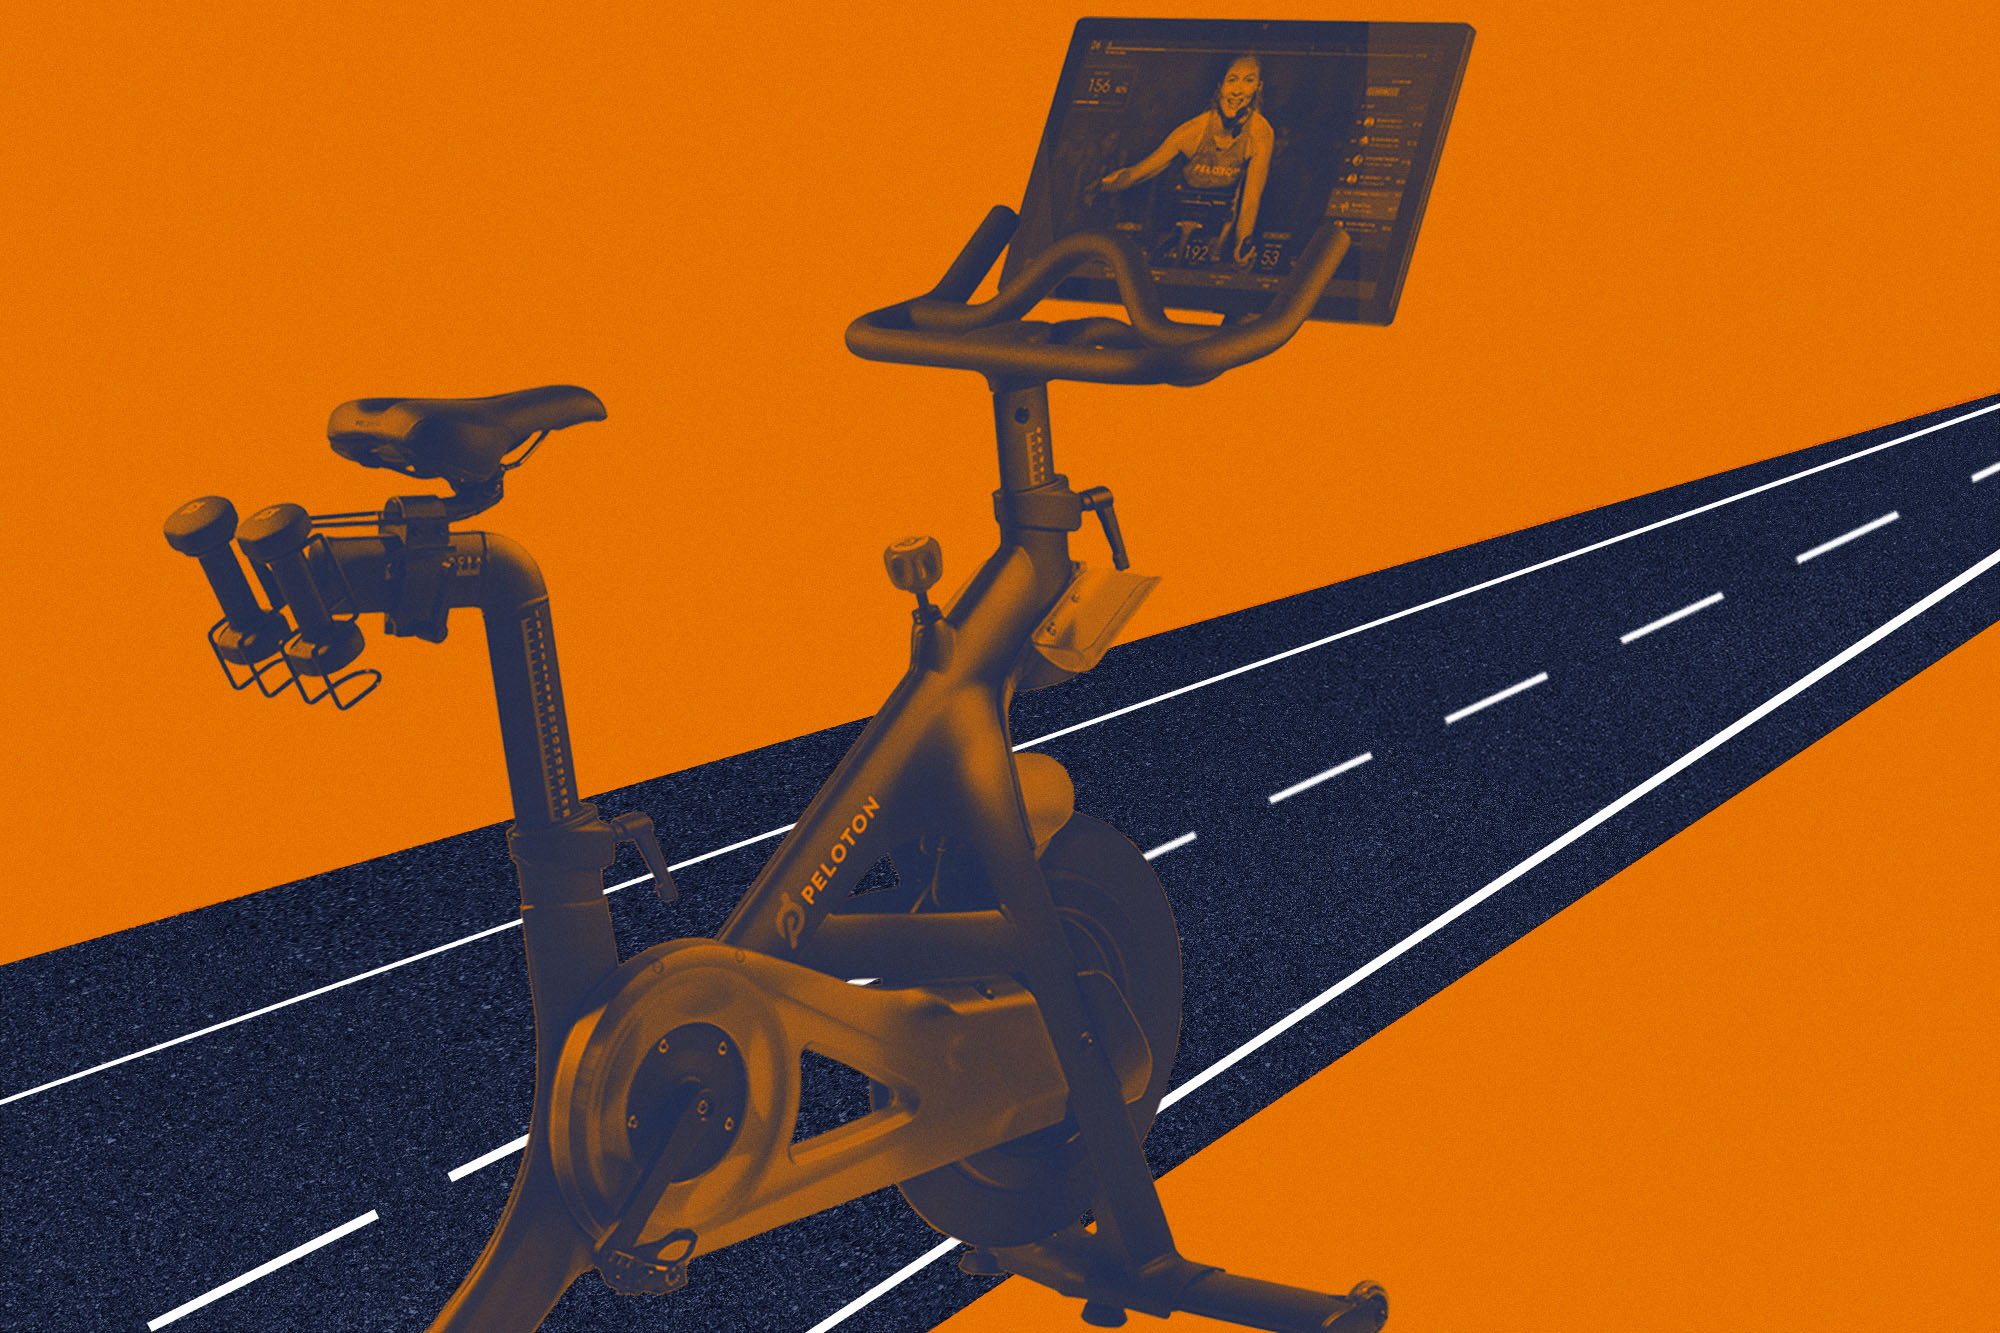 exercise bike  on an illustration of a road